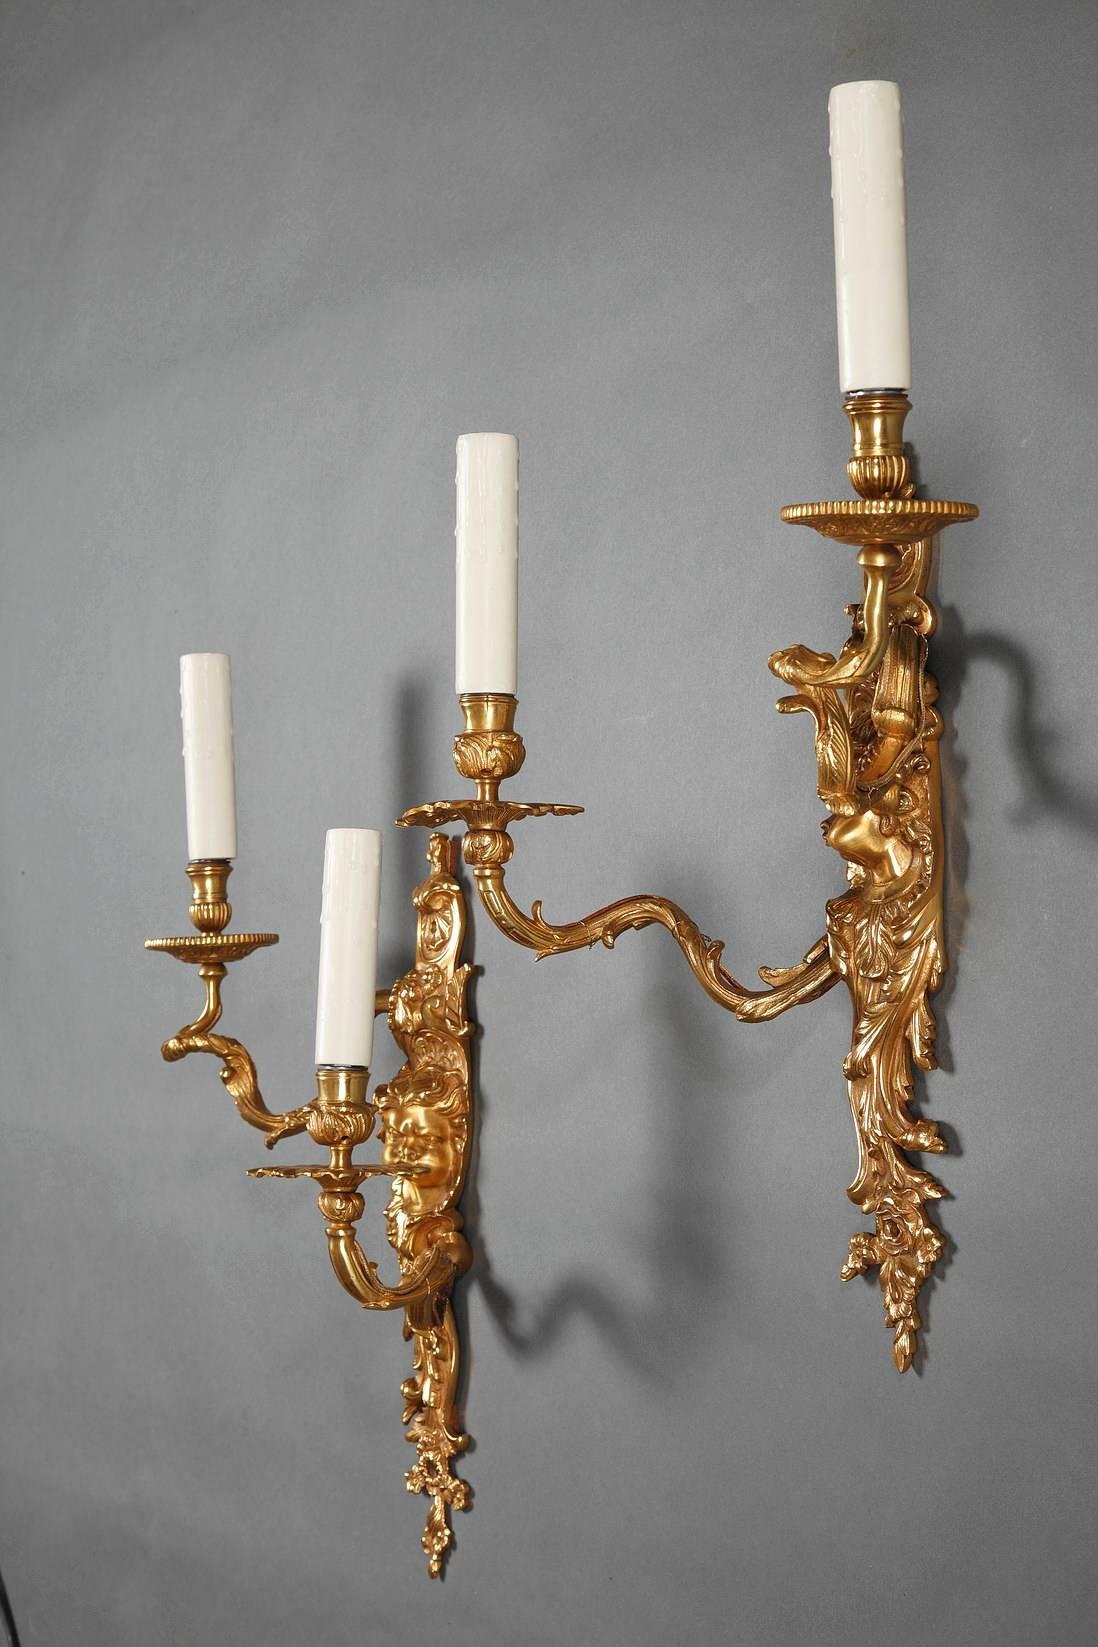 Large pair of gilded and sculpted bronze sconces in Louis XV style. They each feature two arms that wind out from the stem and upward like branches. Each stem is richly decorated with scrolling foliage, shells, flowers, and a baby who is puffing his